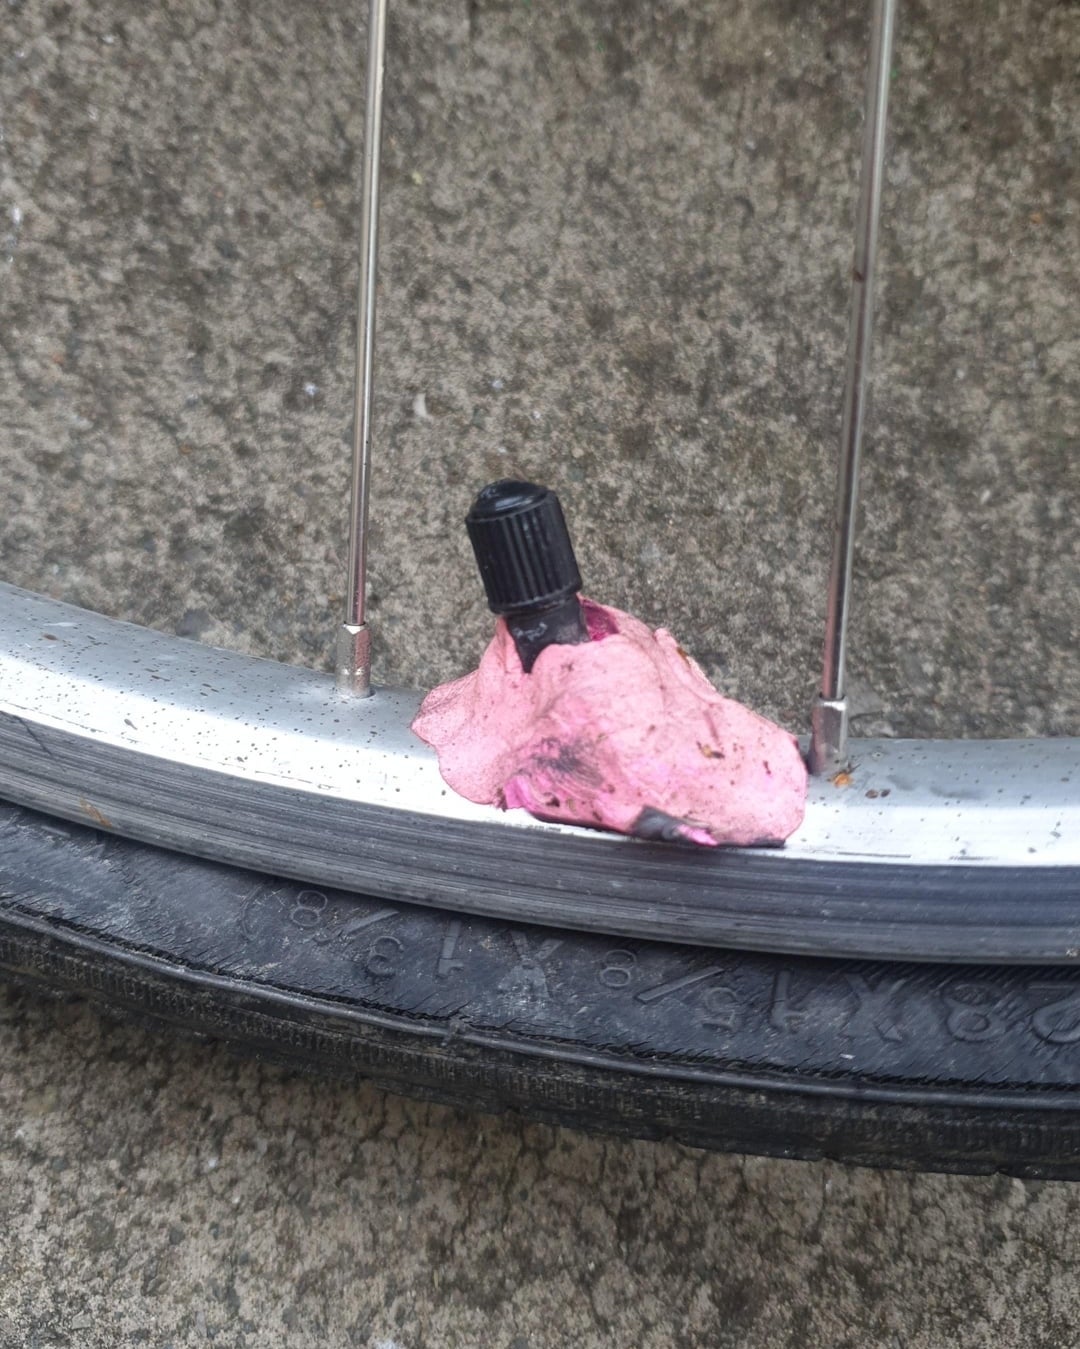 Bicycle tire with punctured pink bubble gum stuck on its valve